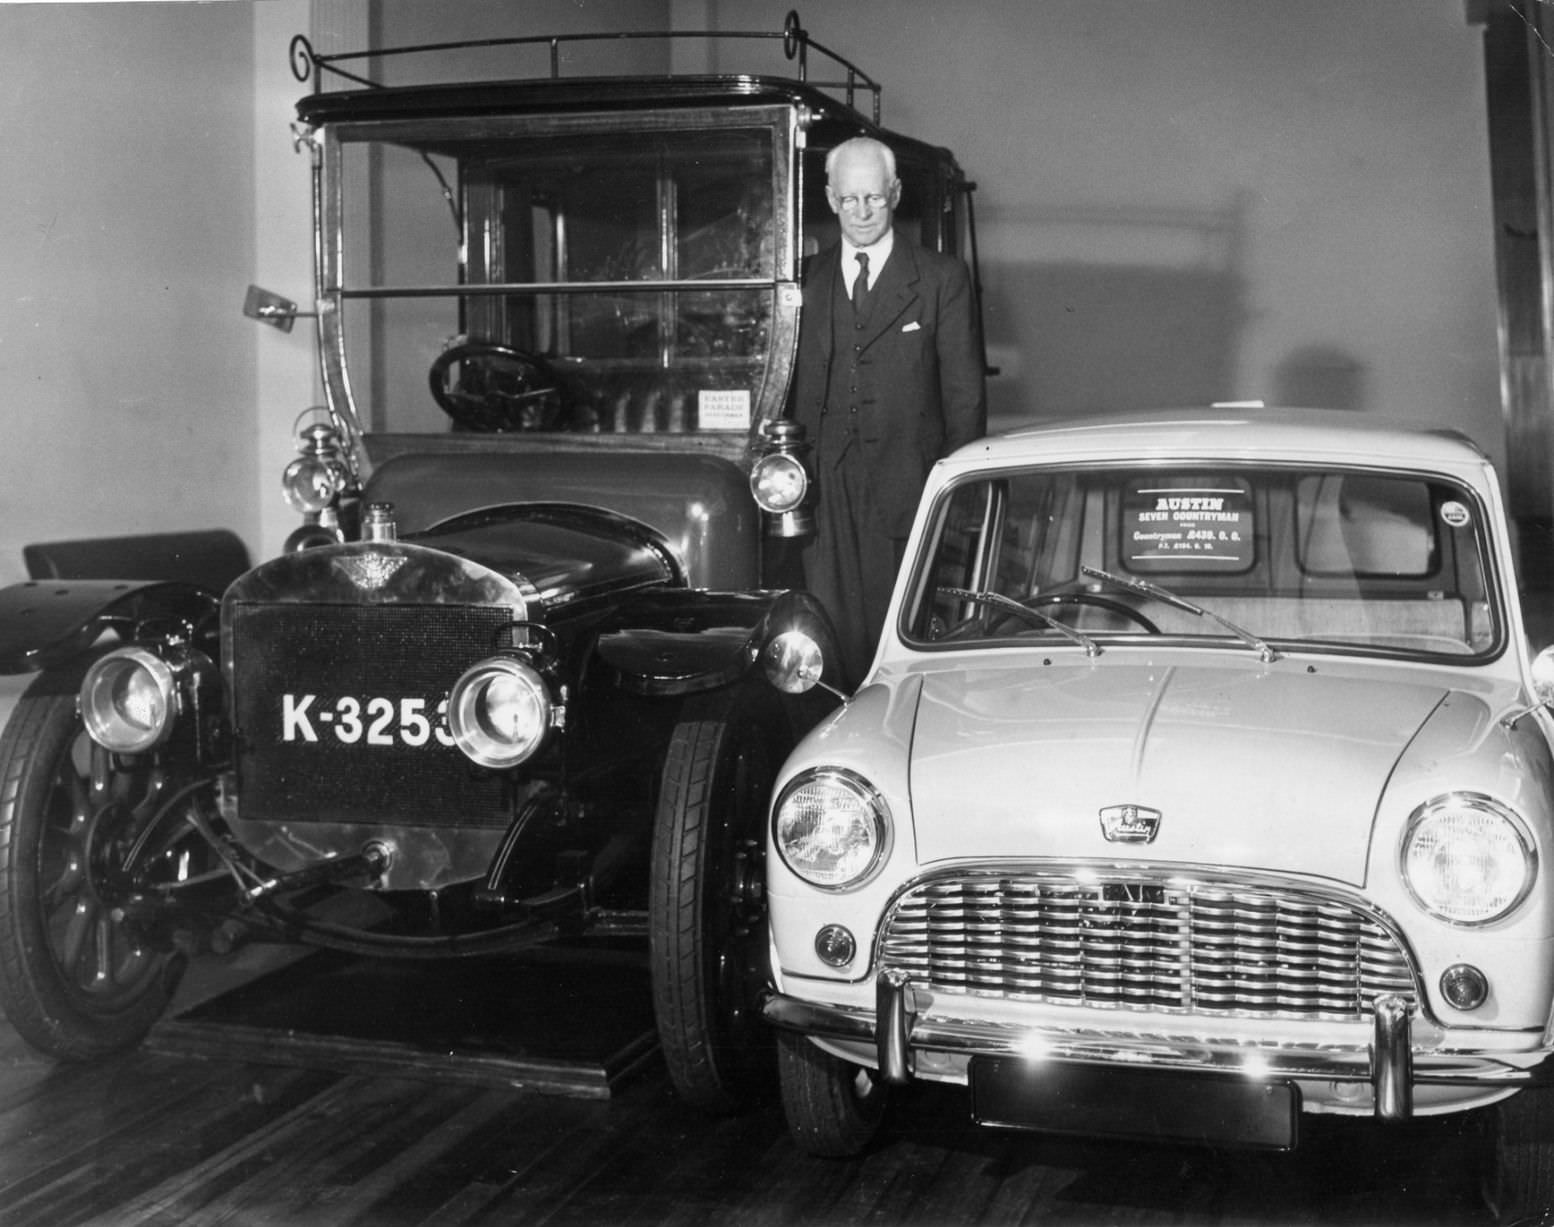 Mr Norwood at Austin Motors with an old car and an Austin Seven Countryman, Birmingham, circa 1960.